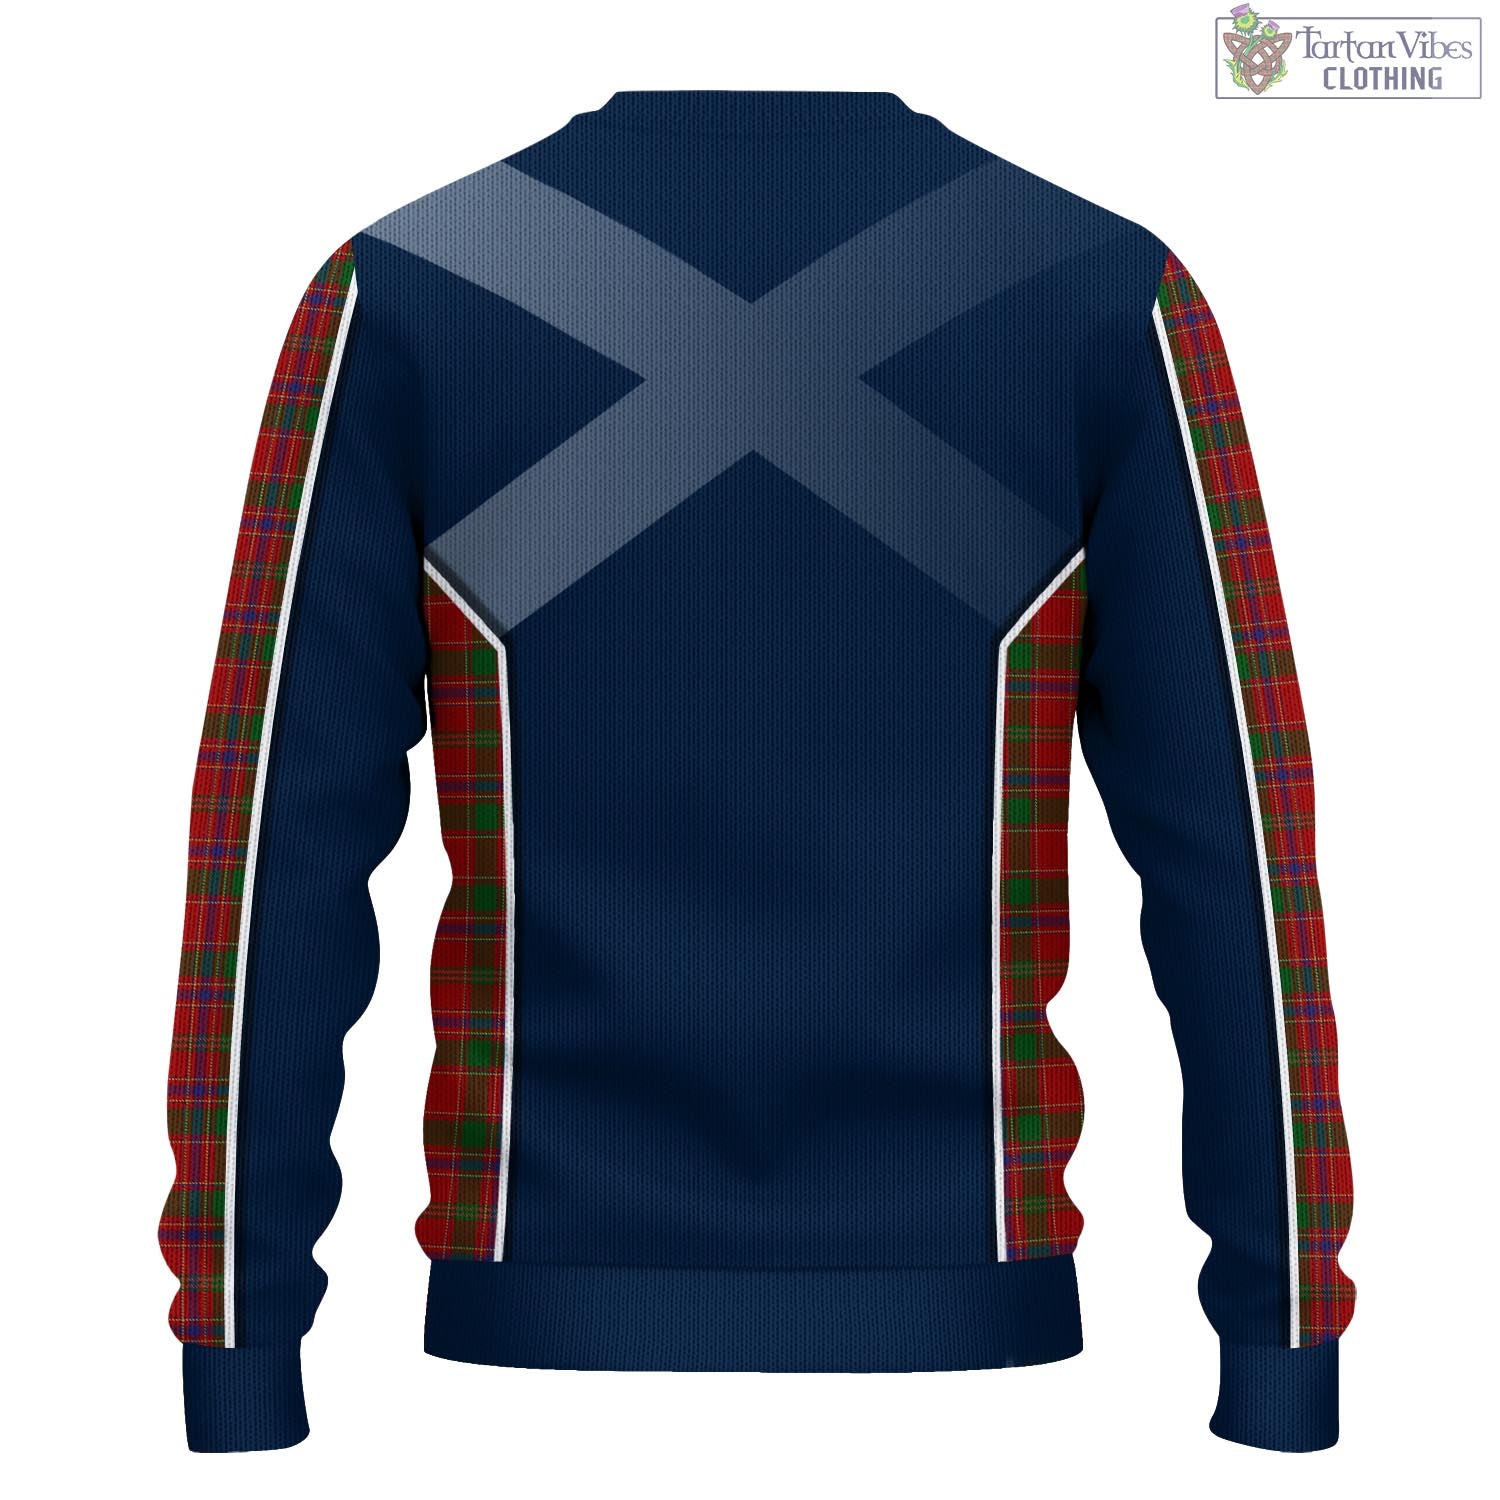 Tartan Vibes Clothing Munro Tartan Knitted Sweatshirt with Family Crest and Scottish Thistle Vibes Sport Style